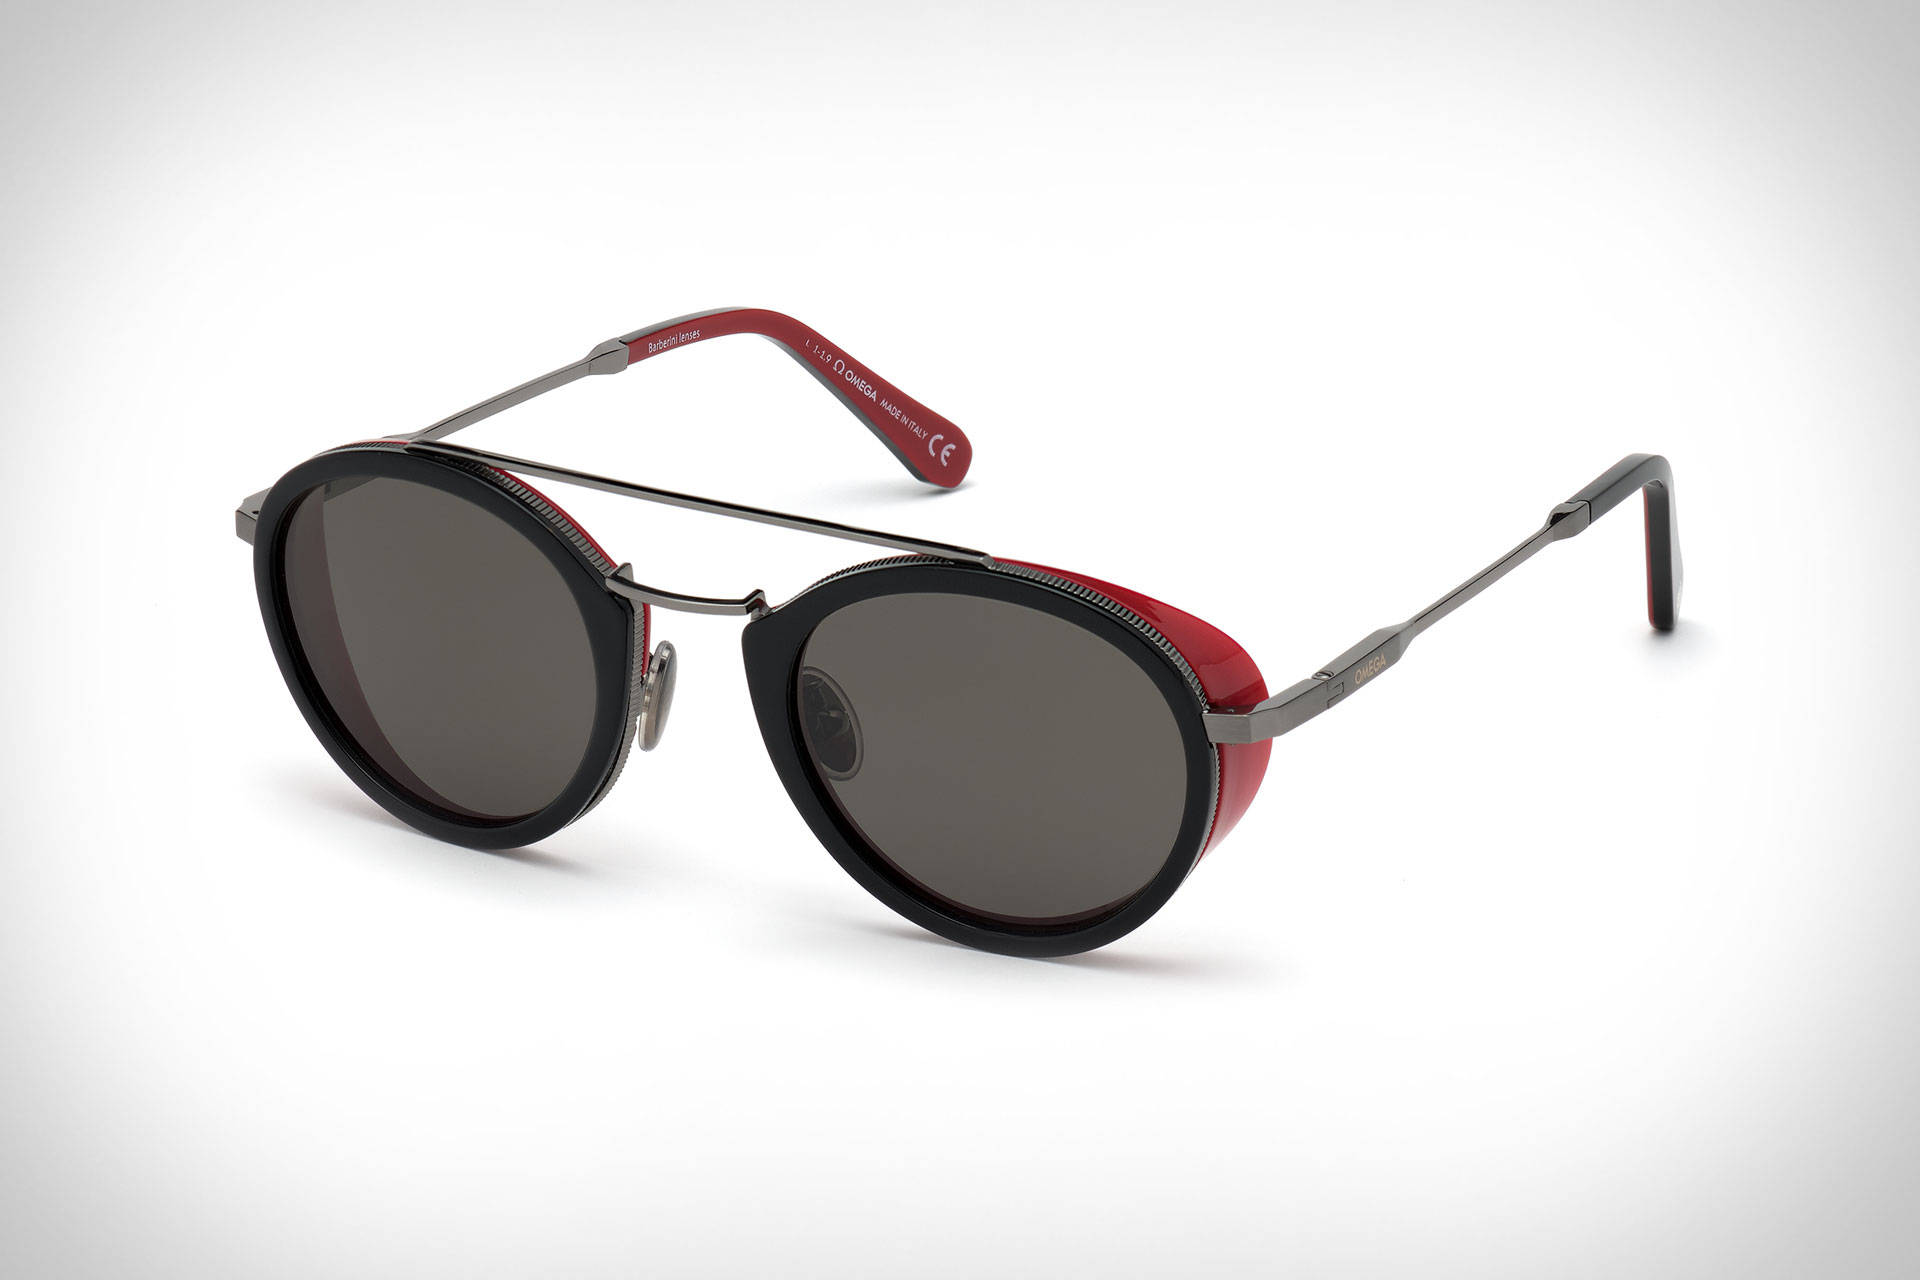 Omega Round With Black Red Frames Sunglasses Wallpaper